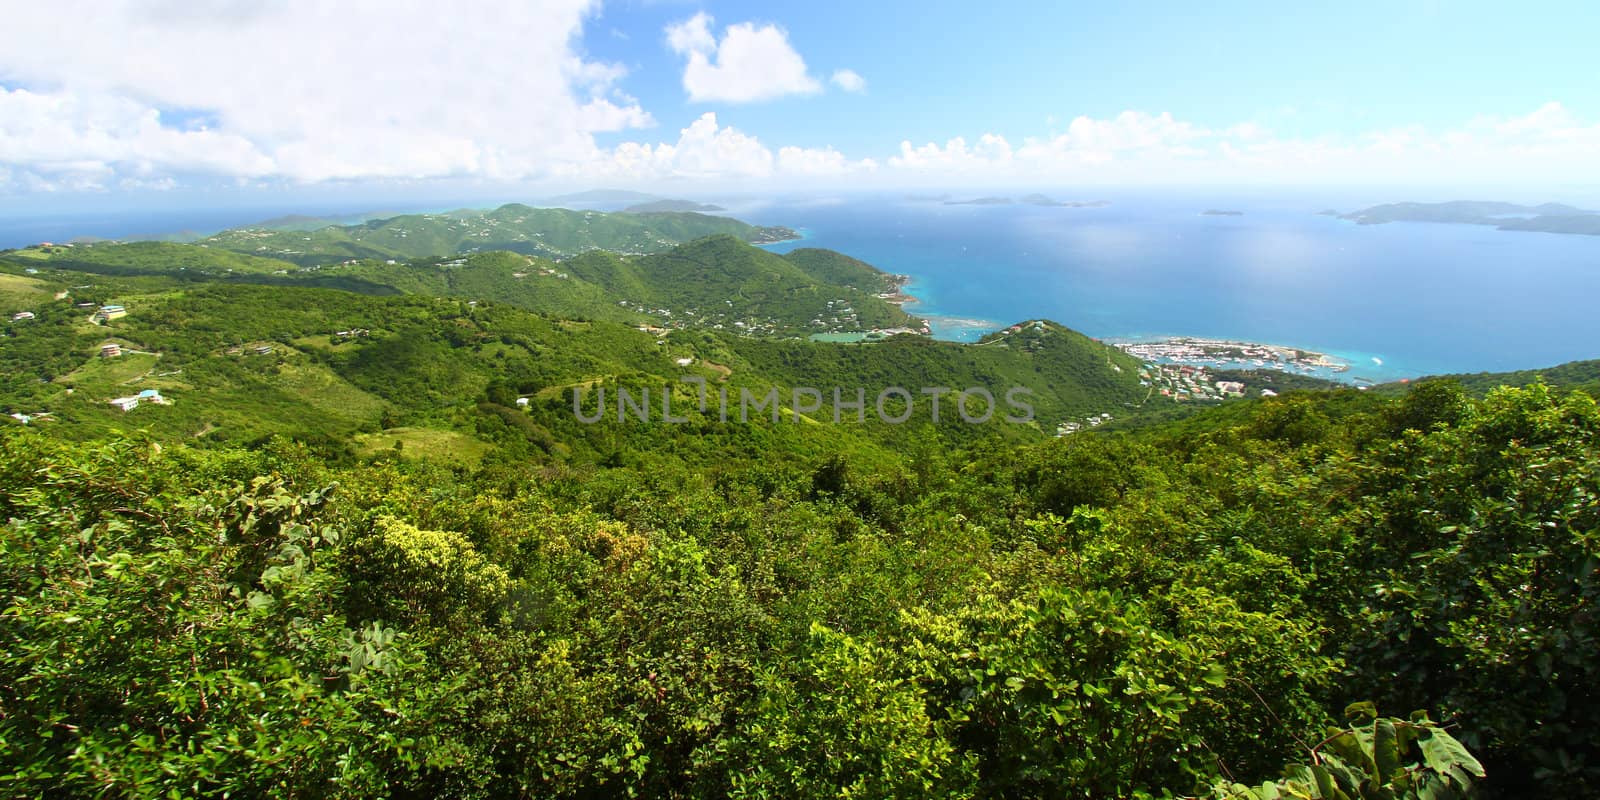 View of Tortola from Sage Mountain National Park - British Virgin Islands.